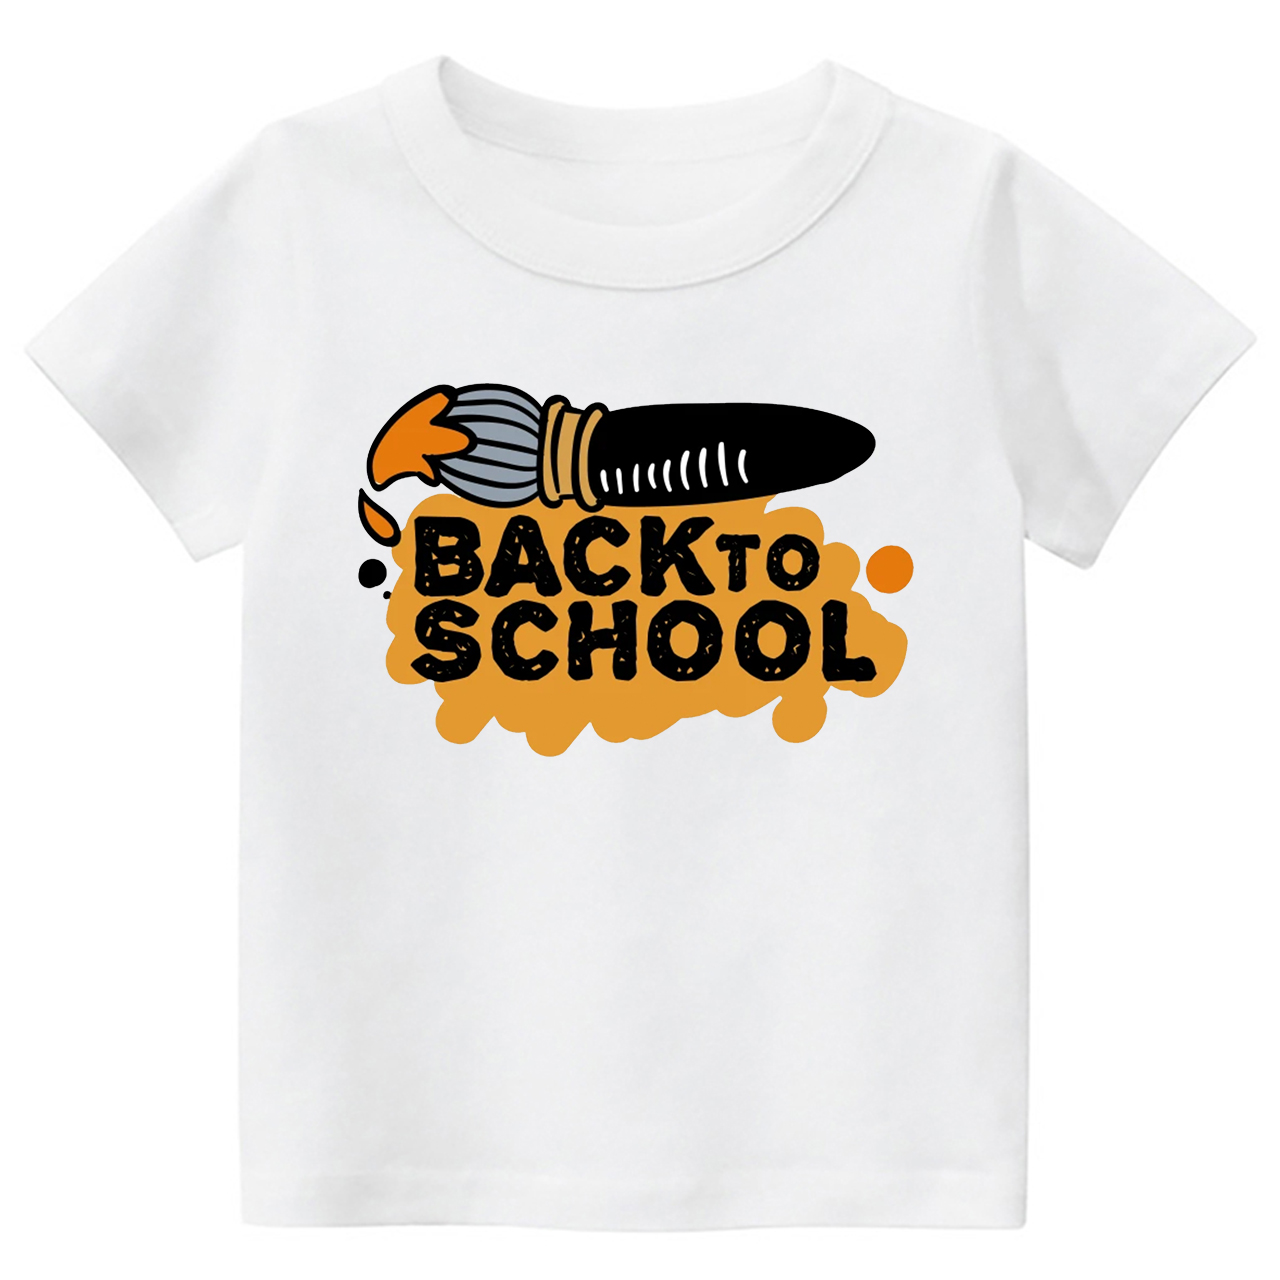 Back to School Pen And Ink Design Kids Shirts